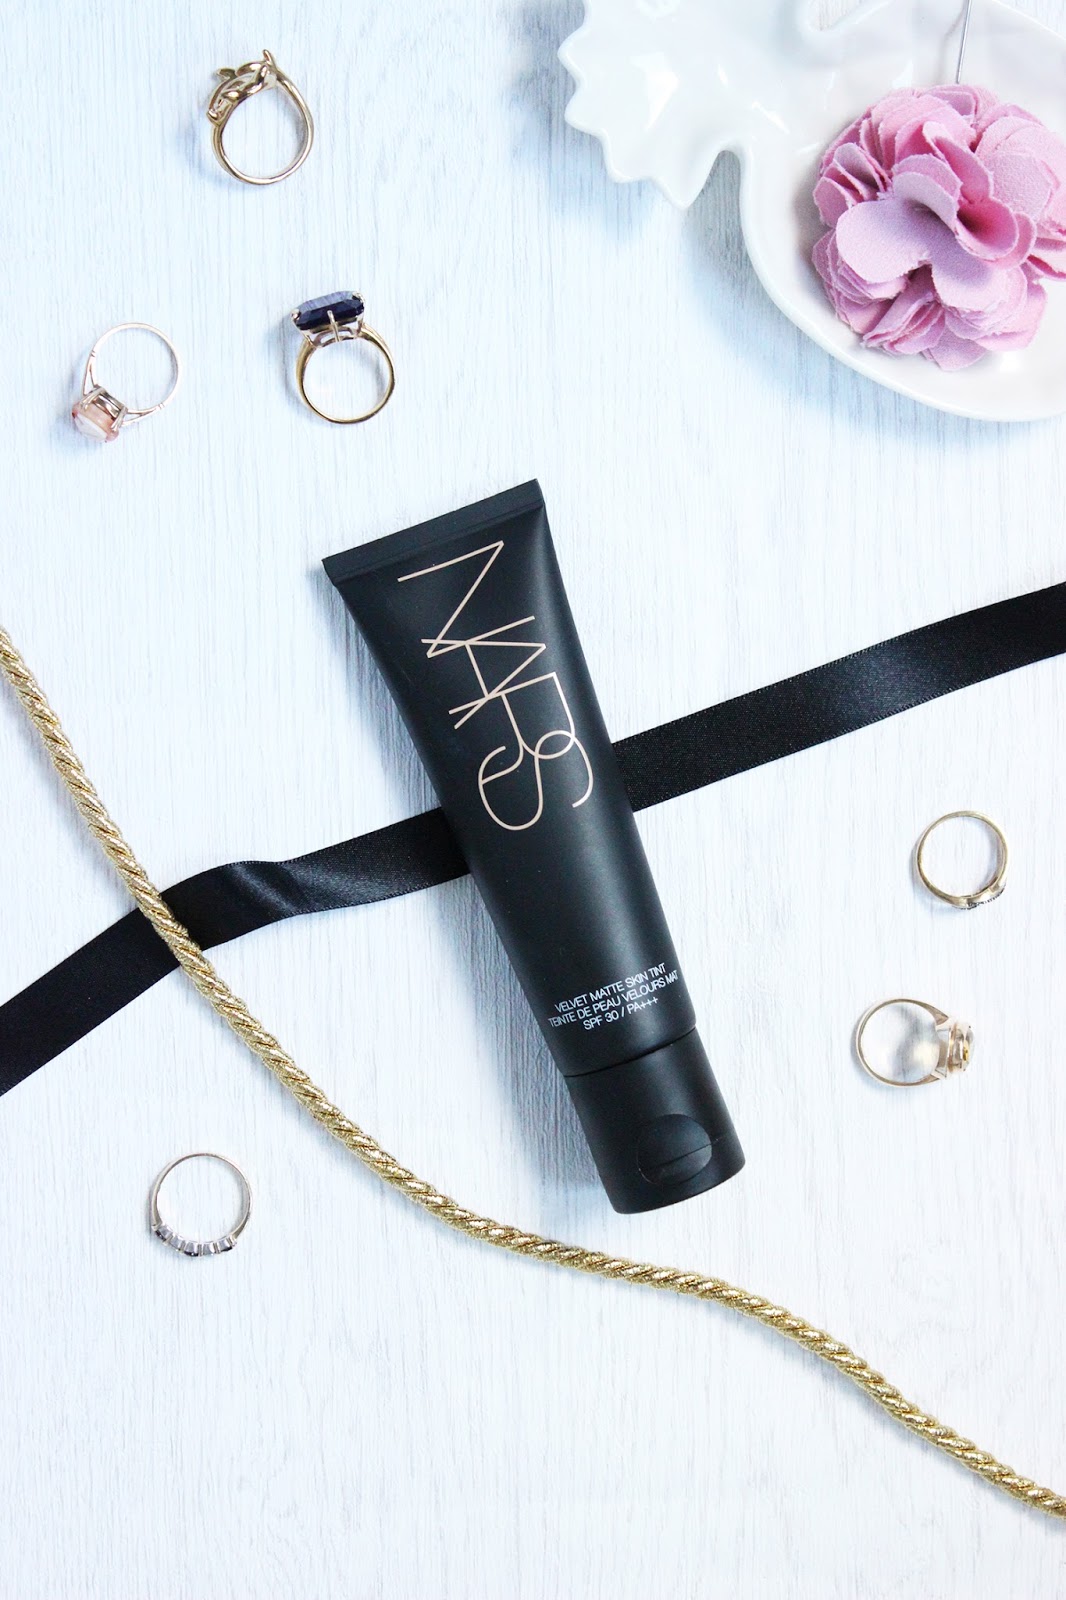 NARS Velvet Matte Skin Tint review and swatches on pale skin